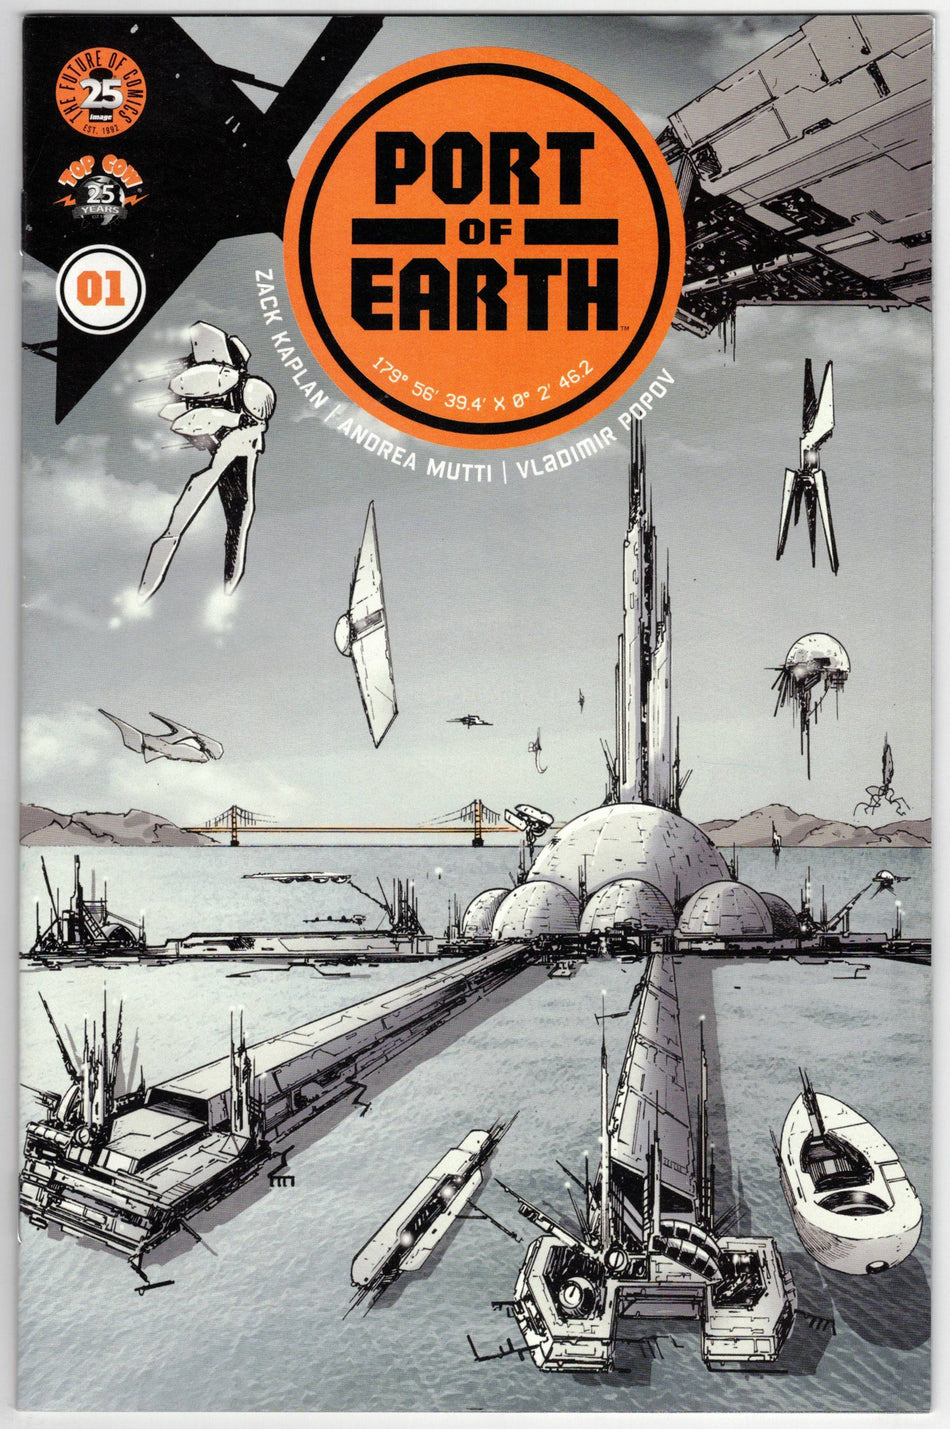 Photo of Port of Earth (2017) Issue 1A - Near Mint - Comic sold by Stronghold Collectibles